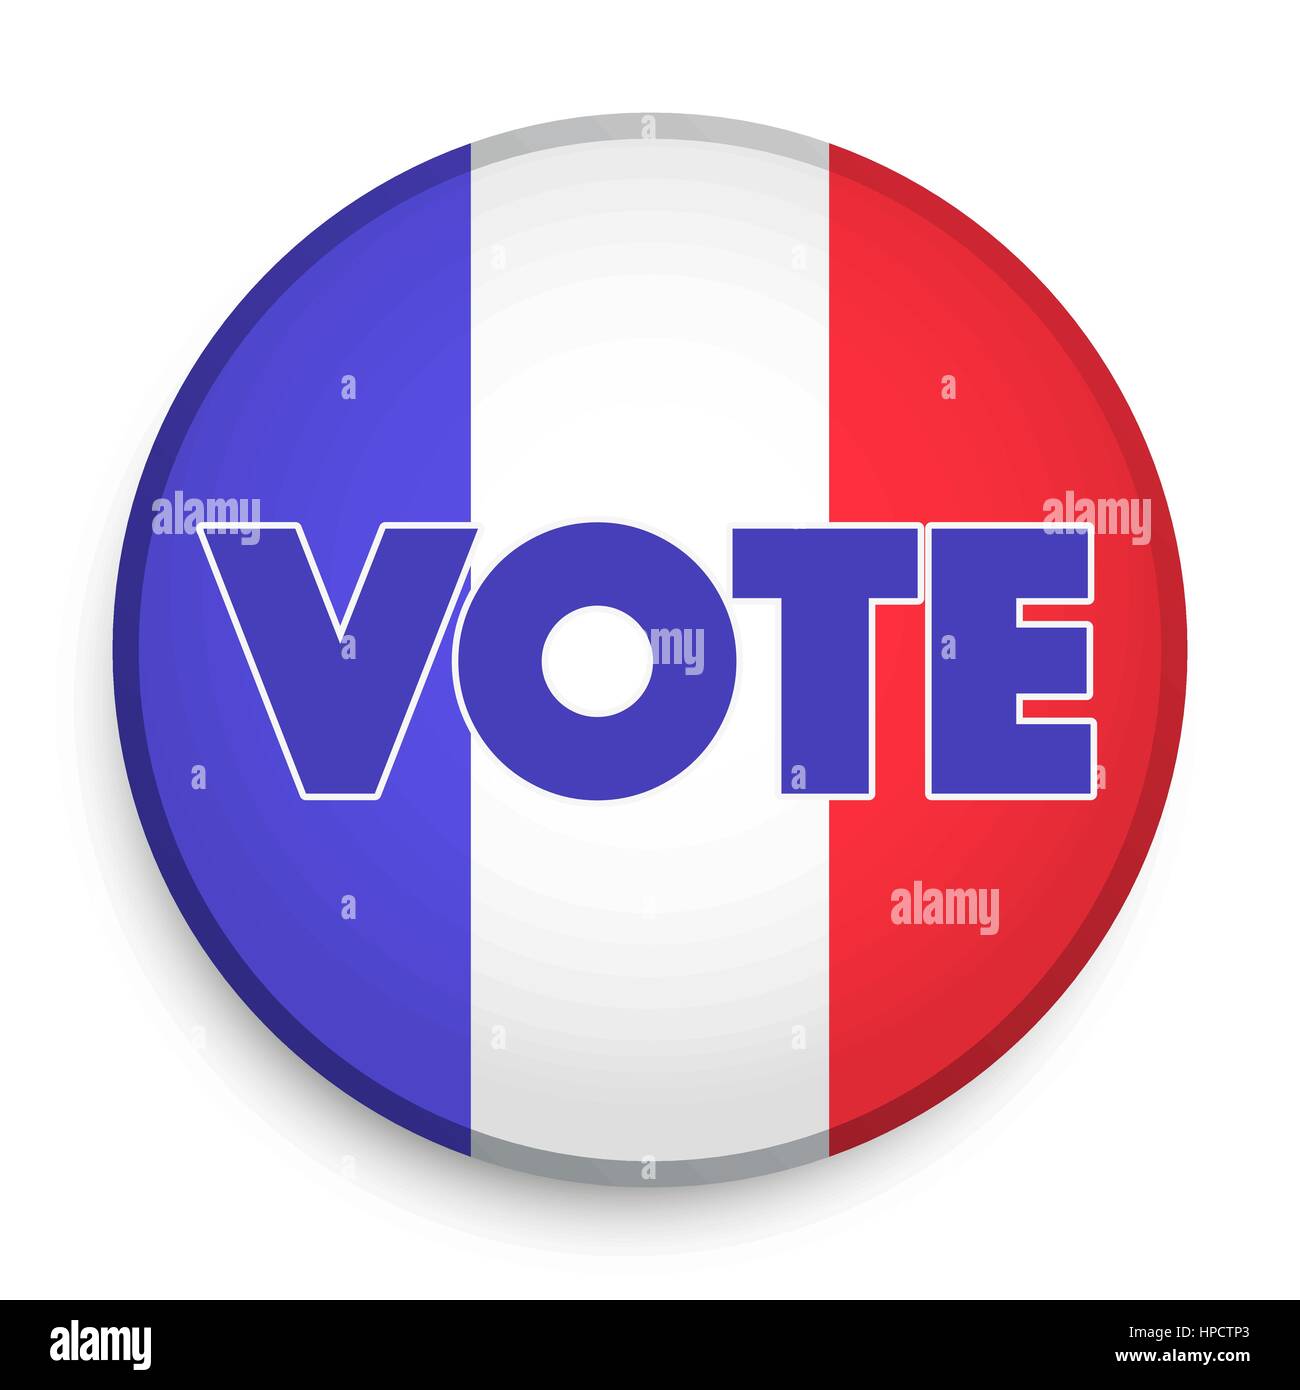 Badge of Election 2017 in France. Stock Vector